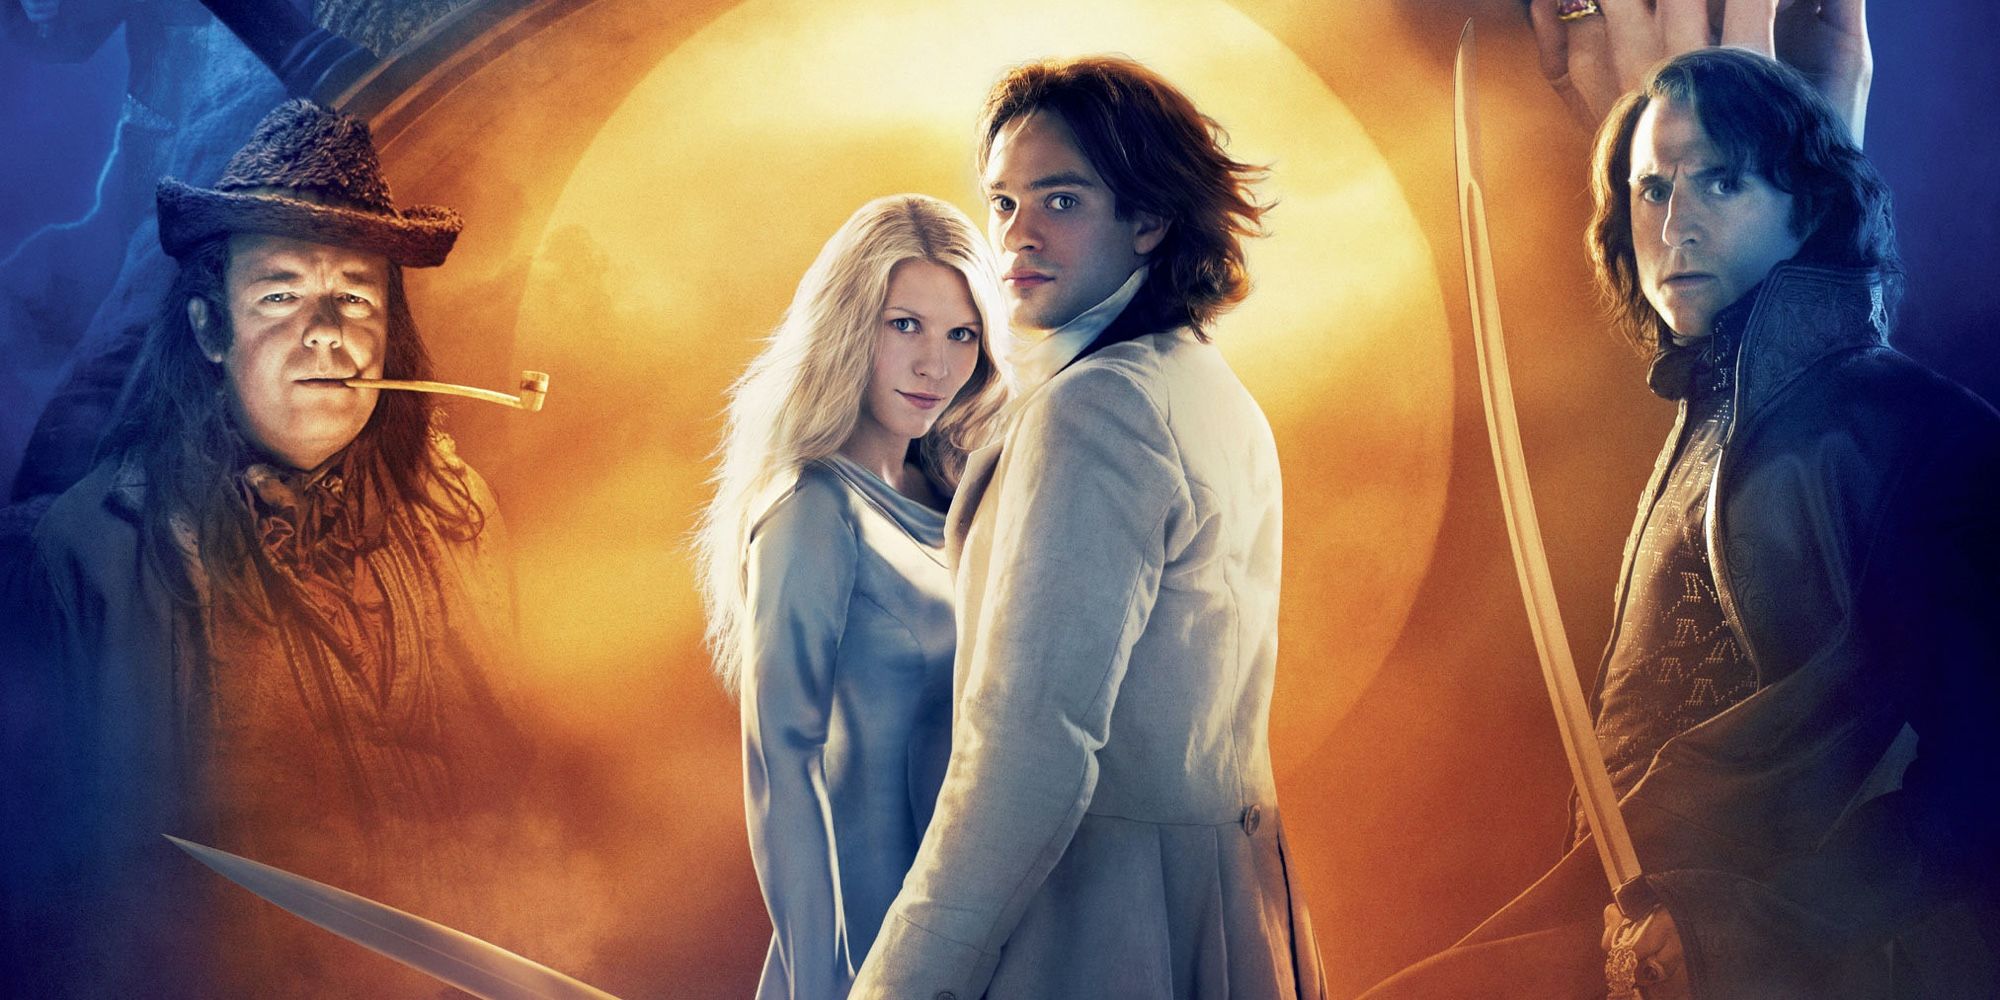 Yvaine (Claire Danes) and Tristan (Charlie Cox) holding hands in the movie poster for Stardust